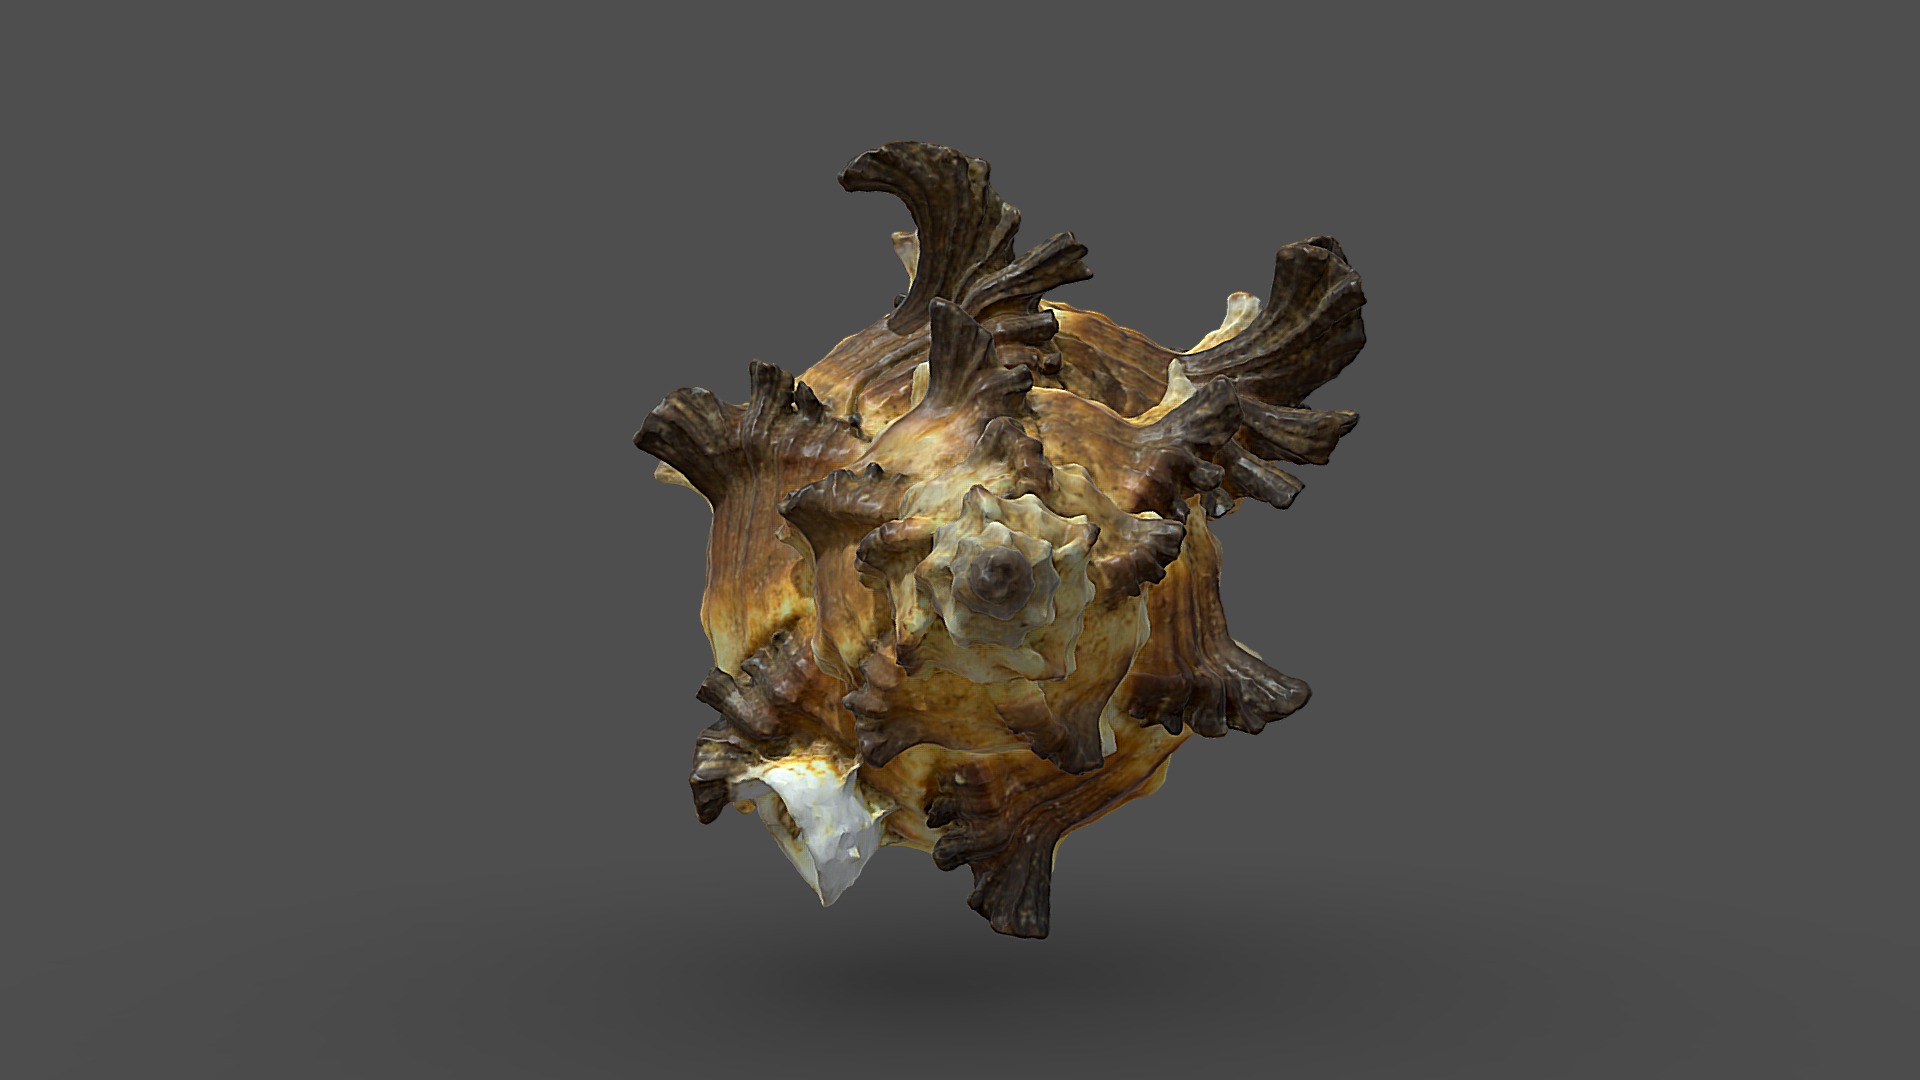 3D model Shell_4k - This is a 3D model of the Shell_4k. The 3D model is about a skull of an animal.